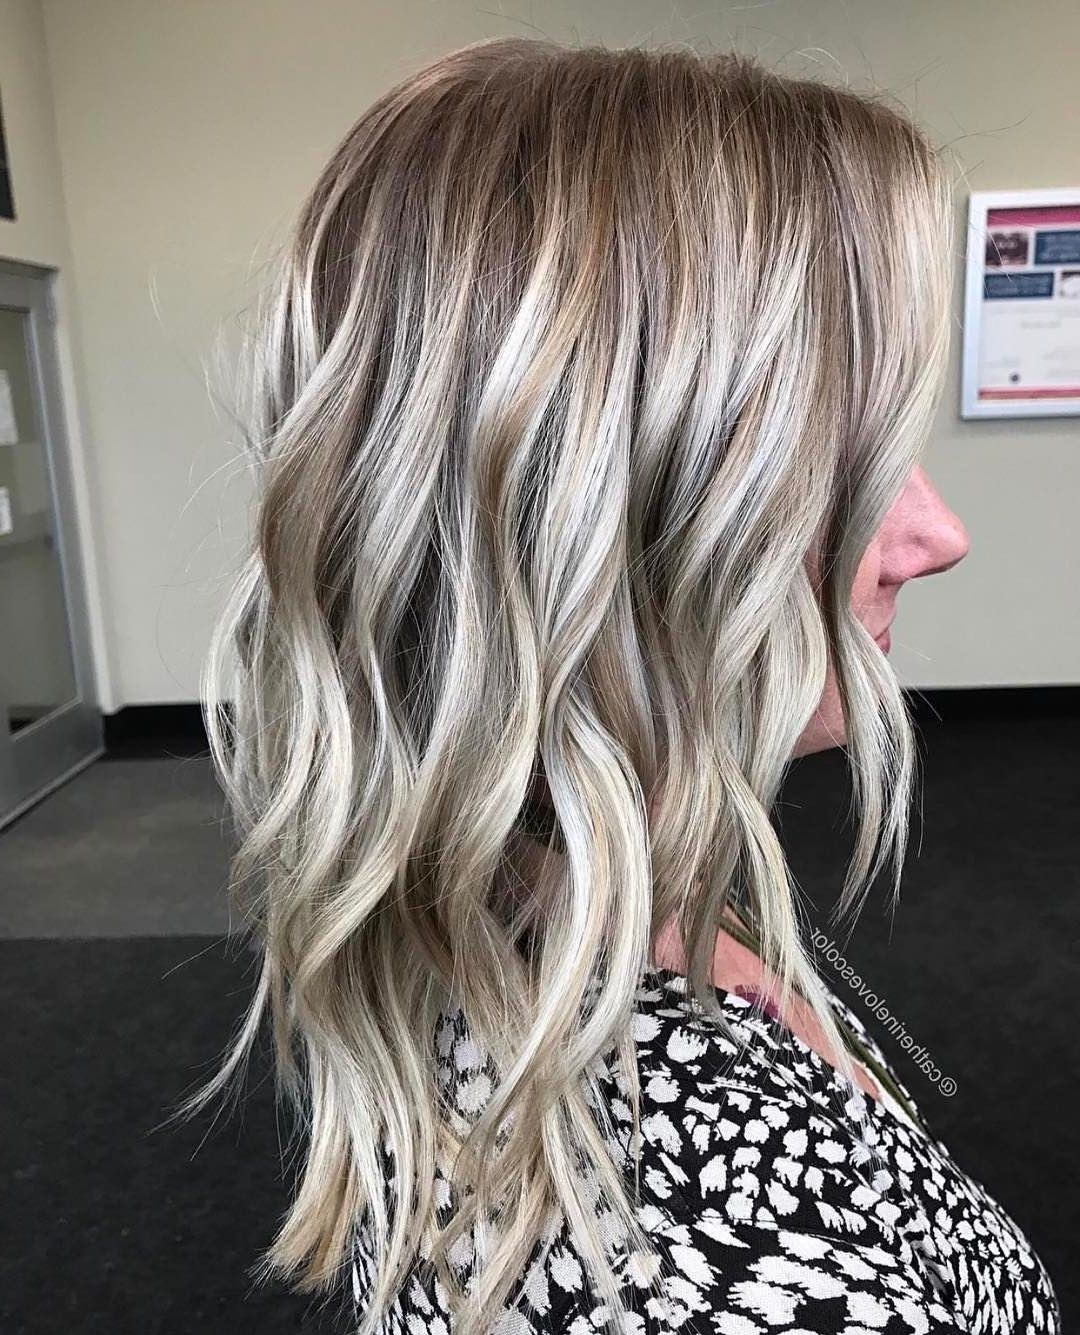 Well Liked Sleek Ash Blonde Hairstyles Regarding 20 Adorable Ash Blonde Hairstyles To Try: Hair Color Ideas  (View 3 of 20)